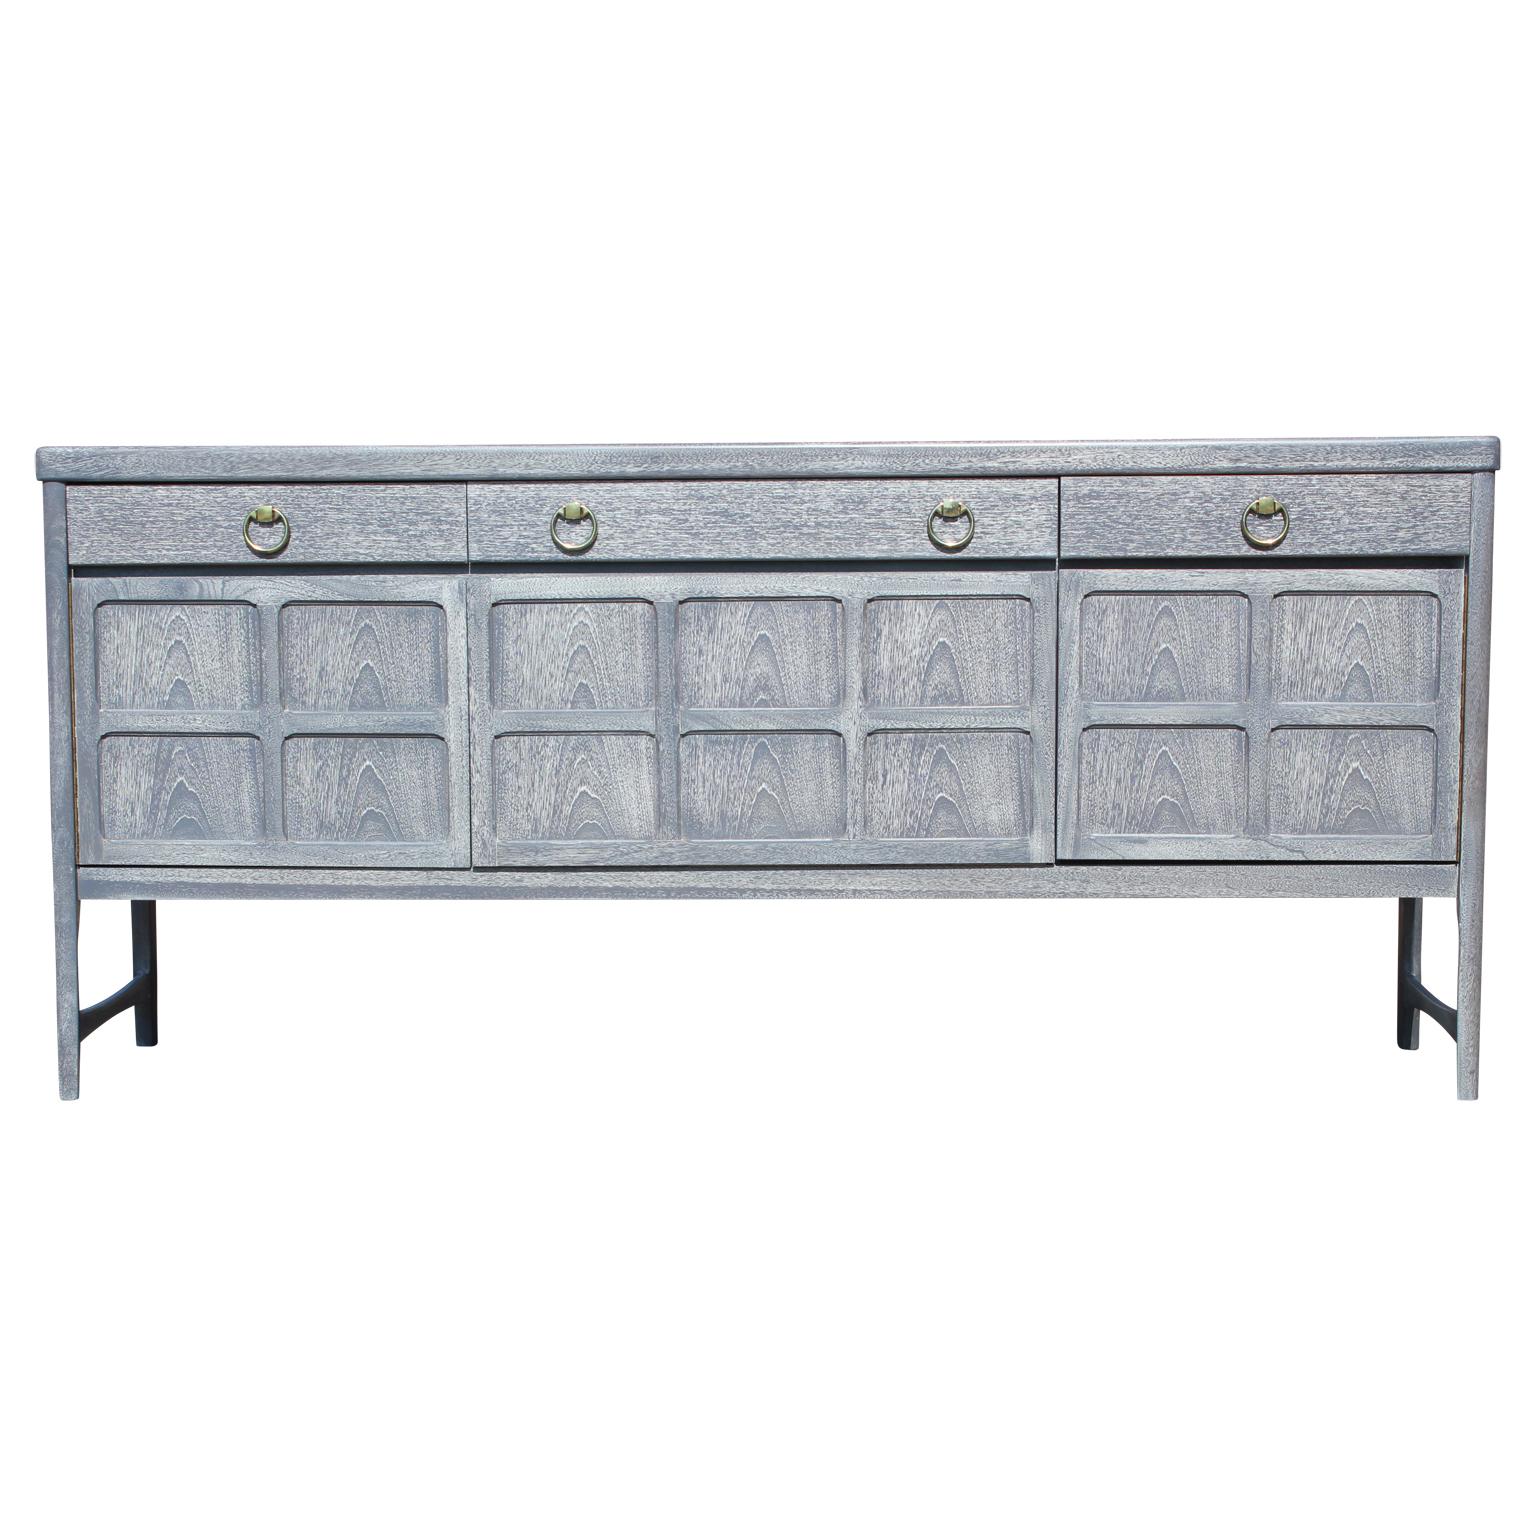 Wonderful modern / Hollywood Regency style sideboard with a grey cerused finish and outfitted with brass ring handles. This credenza features three drawers at the top; one with dividers, making it easy to keep organized and shelving on the bottom.